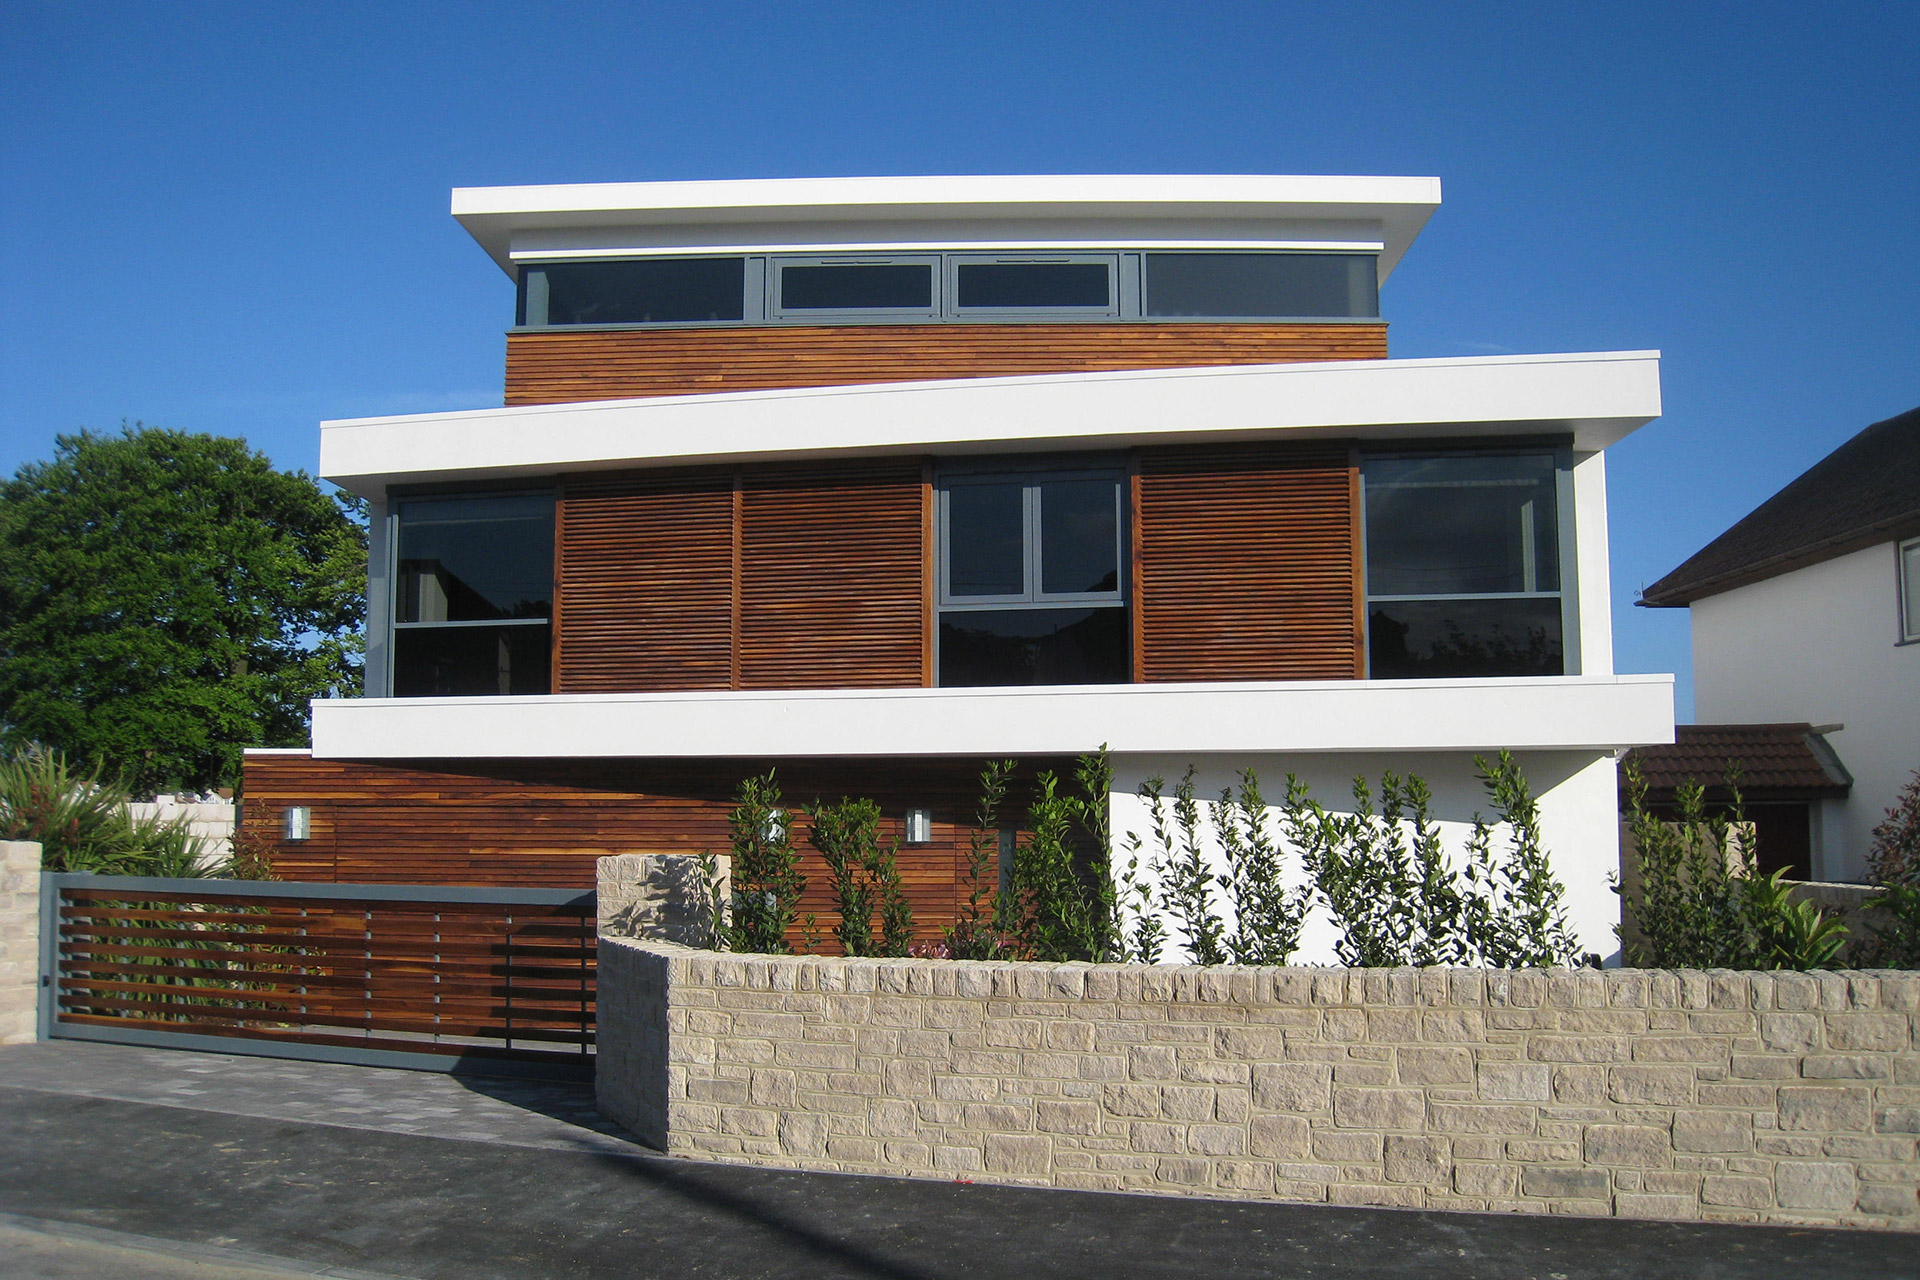 approach view of contemporary house with wood clad from street view